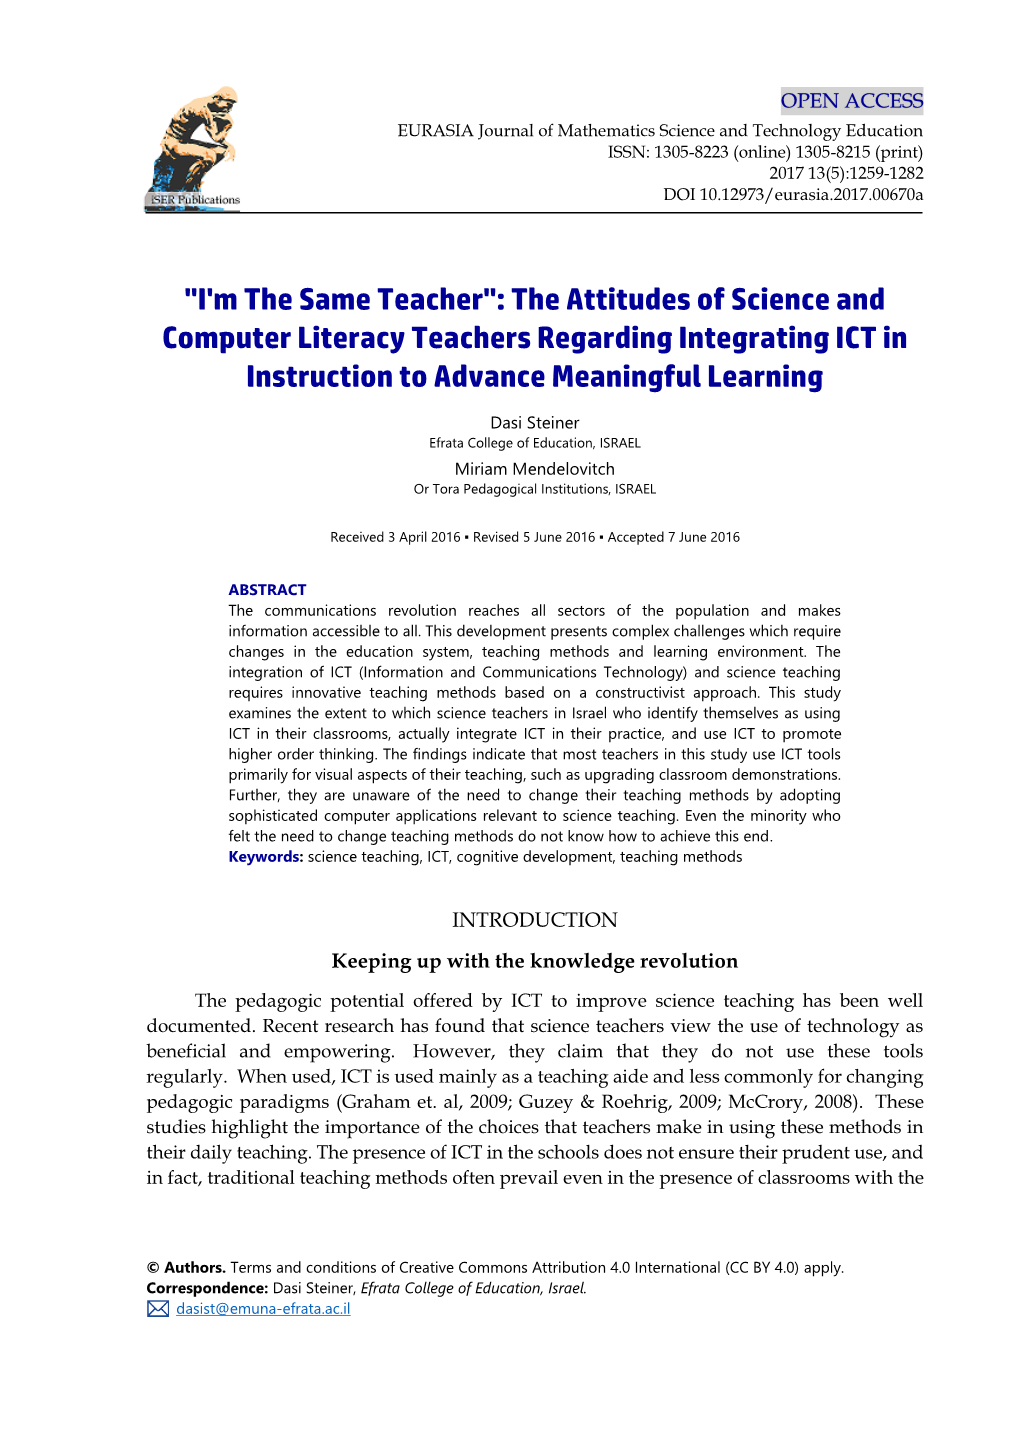 The Attitudes of Science and Computer Literacy Teachers Regarding Integrating ICT in Instruction to Advance Meaningful Learning